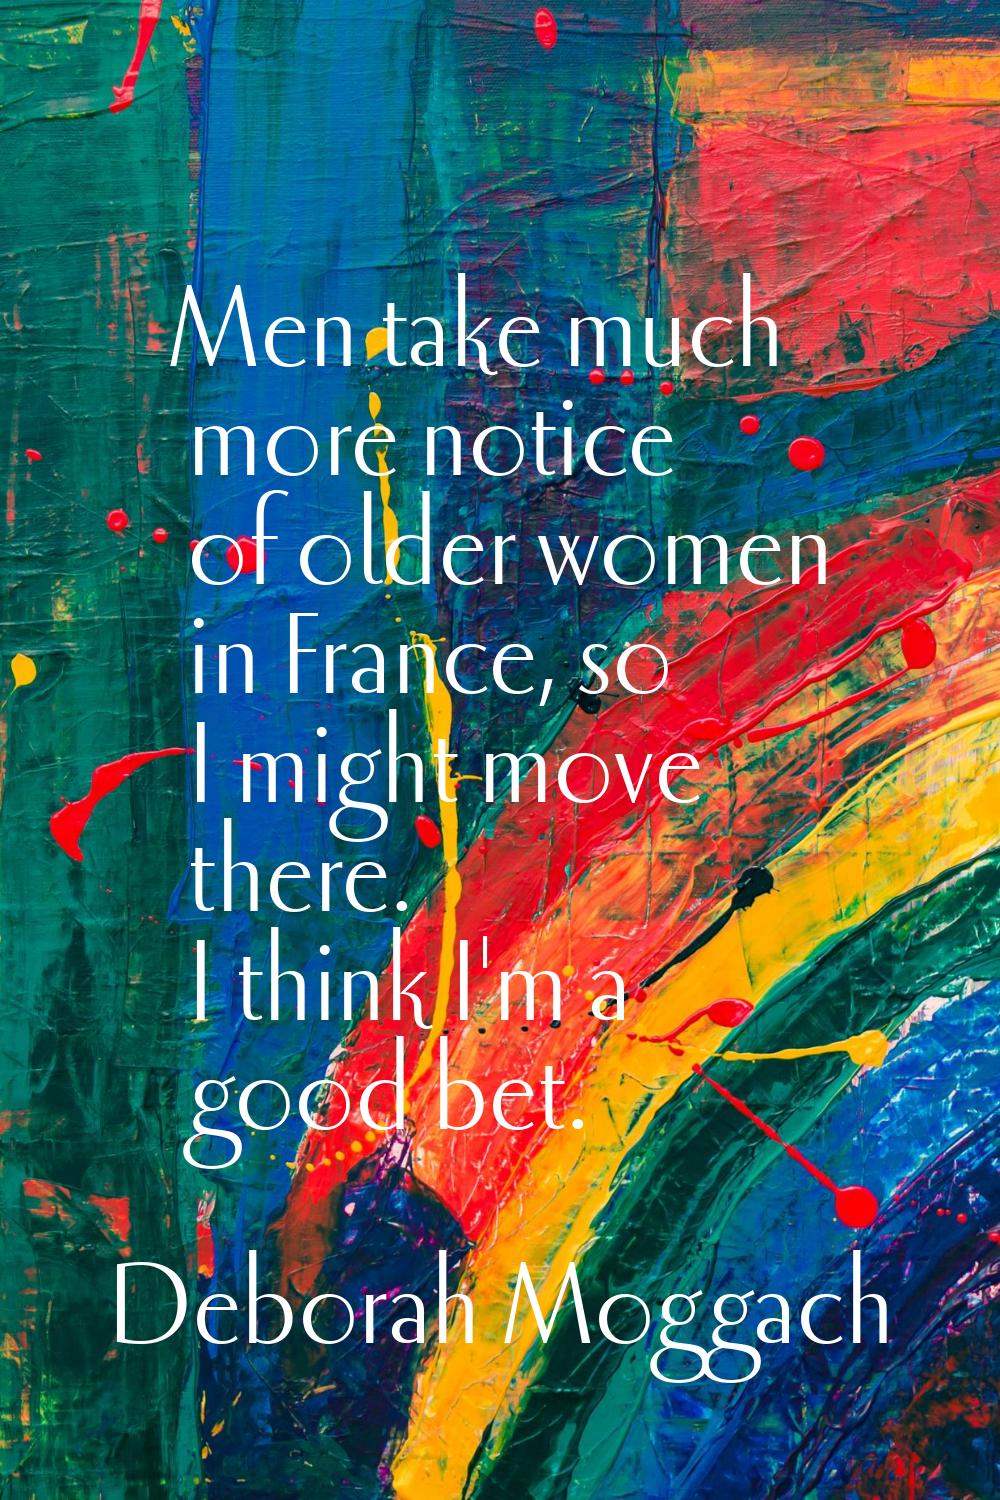 Men take much more notice of older women in France, so I might move there. I think I'm a good bet.